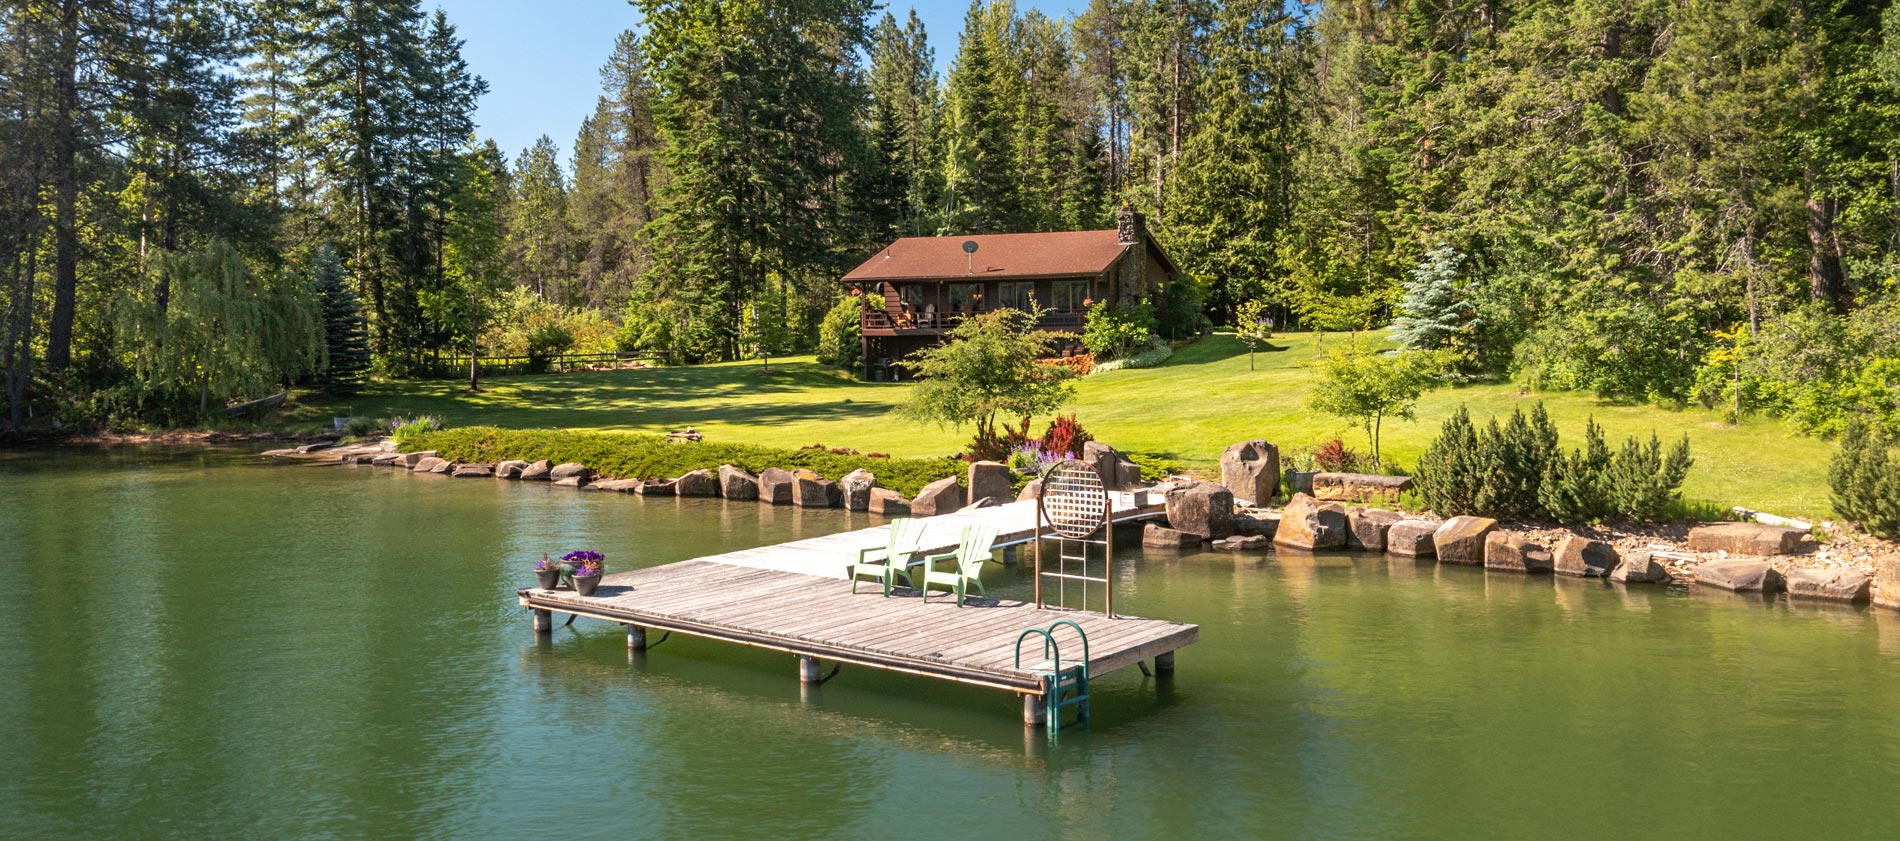 PRIVATE N Idaho waterfront retreat on 2.08 acres w/over 200+FF of deep water on the Pend Oreille River